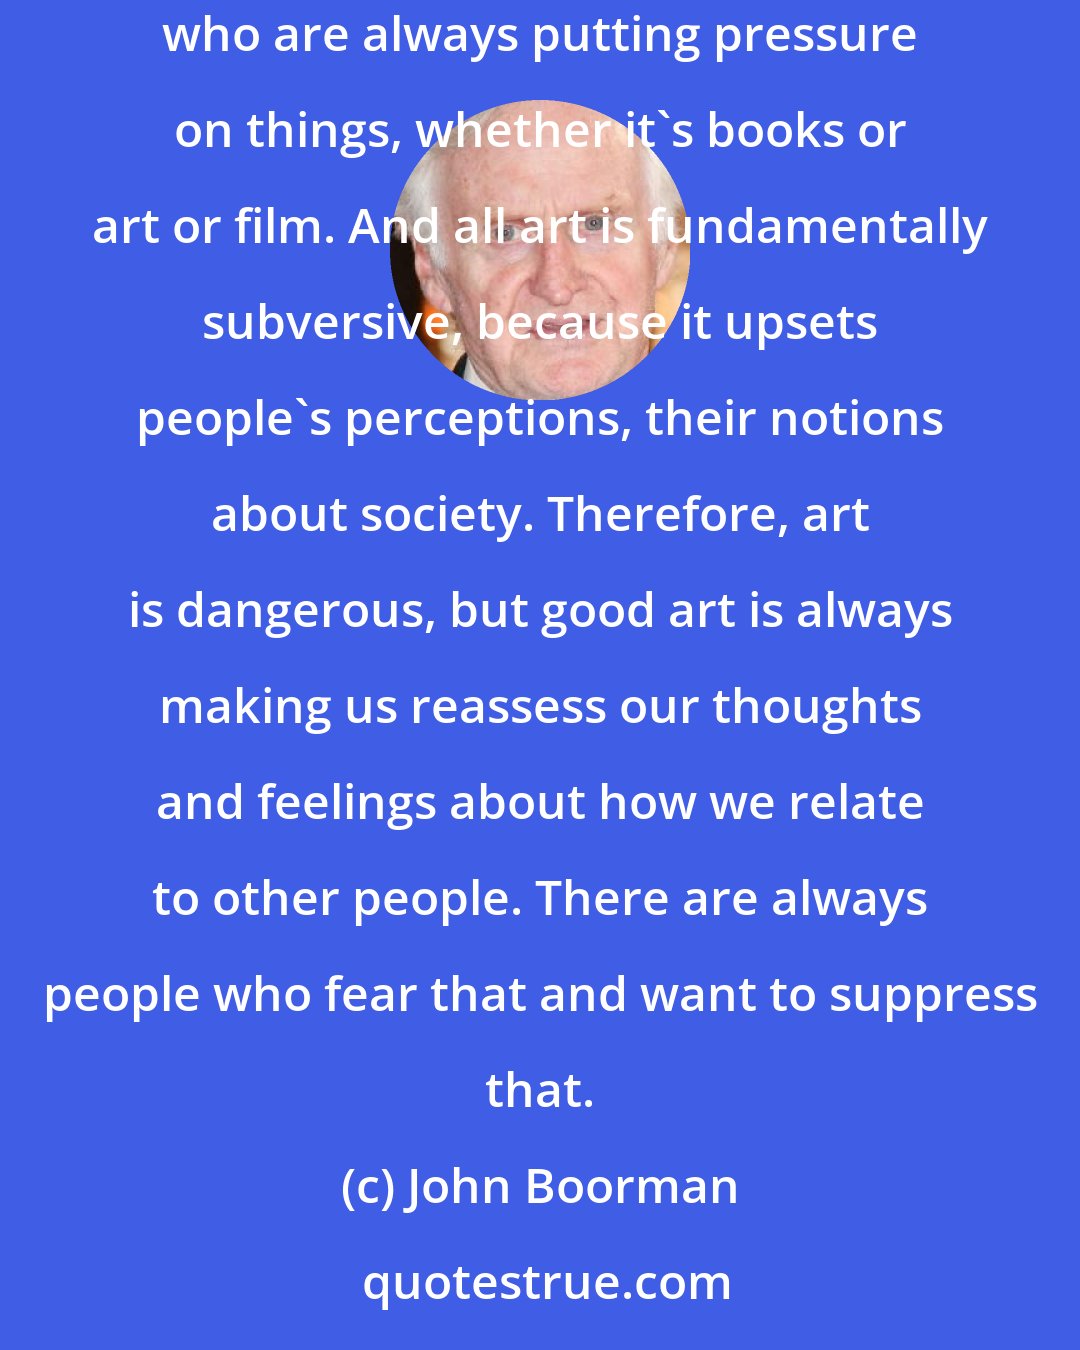 John Boorman: There are always forces at work in a society, certainly in America, which are really forces of censorship -either religious bodies or zealots who are always putting pressure on things, whether it's books or art or film. And all art is fundamentally subversive, because it upsets people's perceptions, their notions about society. Therefore, art is dangerous, but good art is always making us reassess our thoughts and feelings about how we relate to other people. There are always people who fear that and want to suppress that.